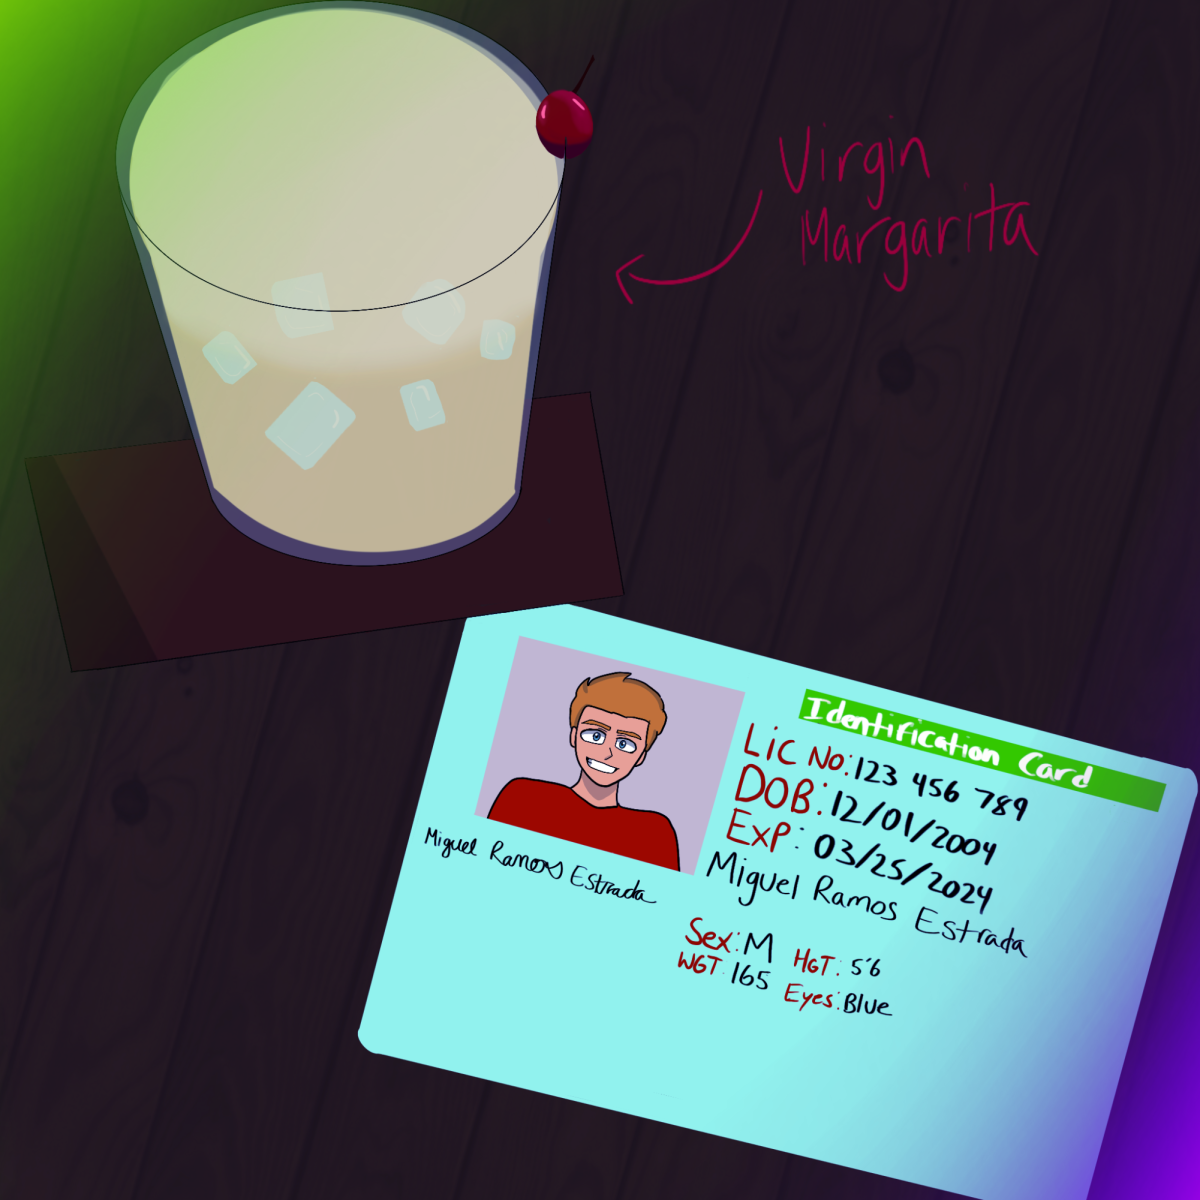 An identification card with the year of birth 2004 sits on a wooden table near a virgin margarita with a red cherry. NIU should allow students aged 19 and older to enter local bars. (Daniela Barajas | Northern Star)